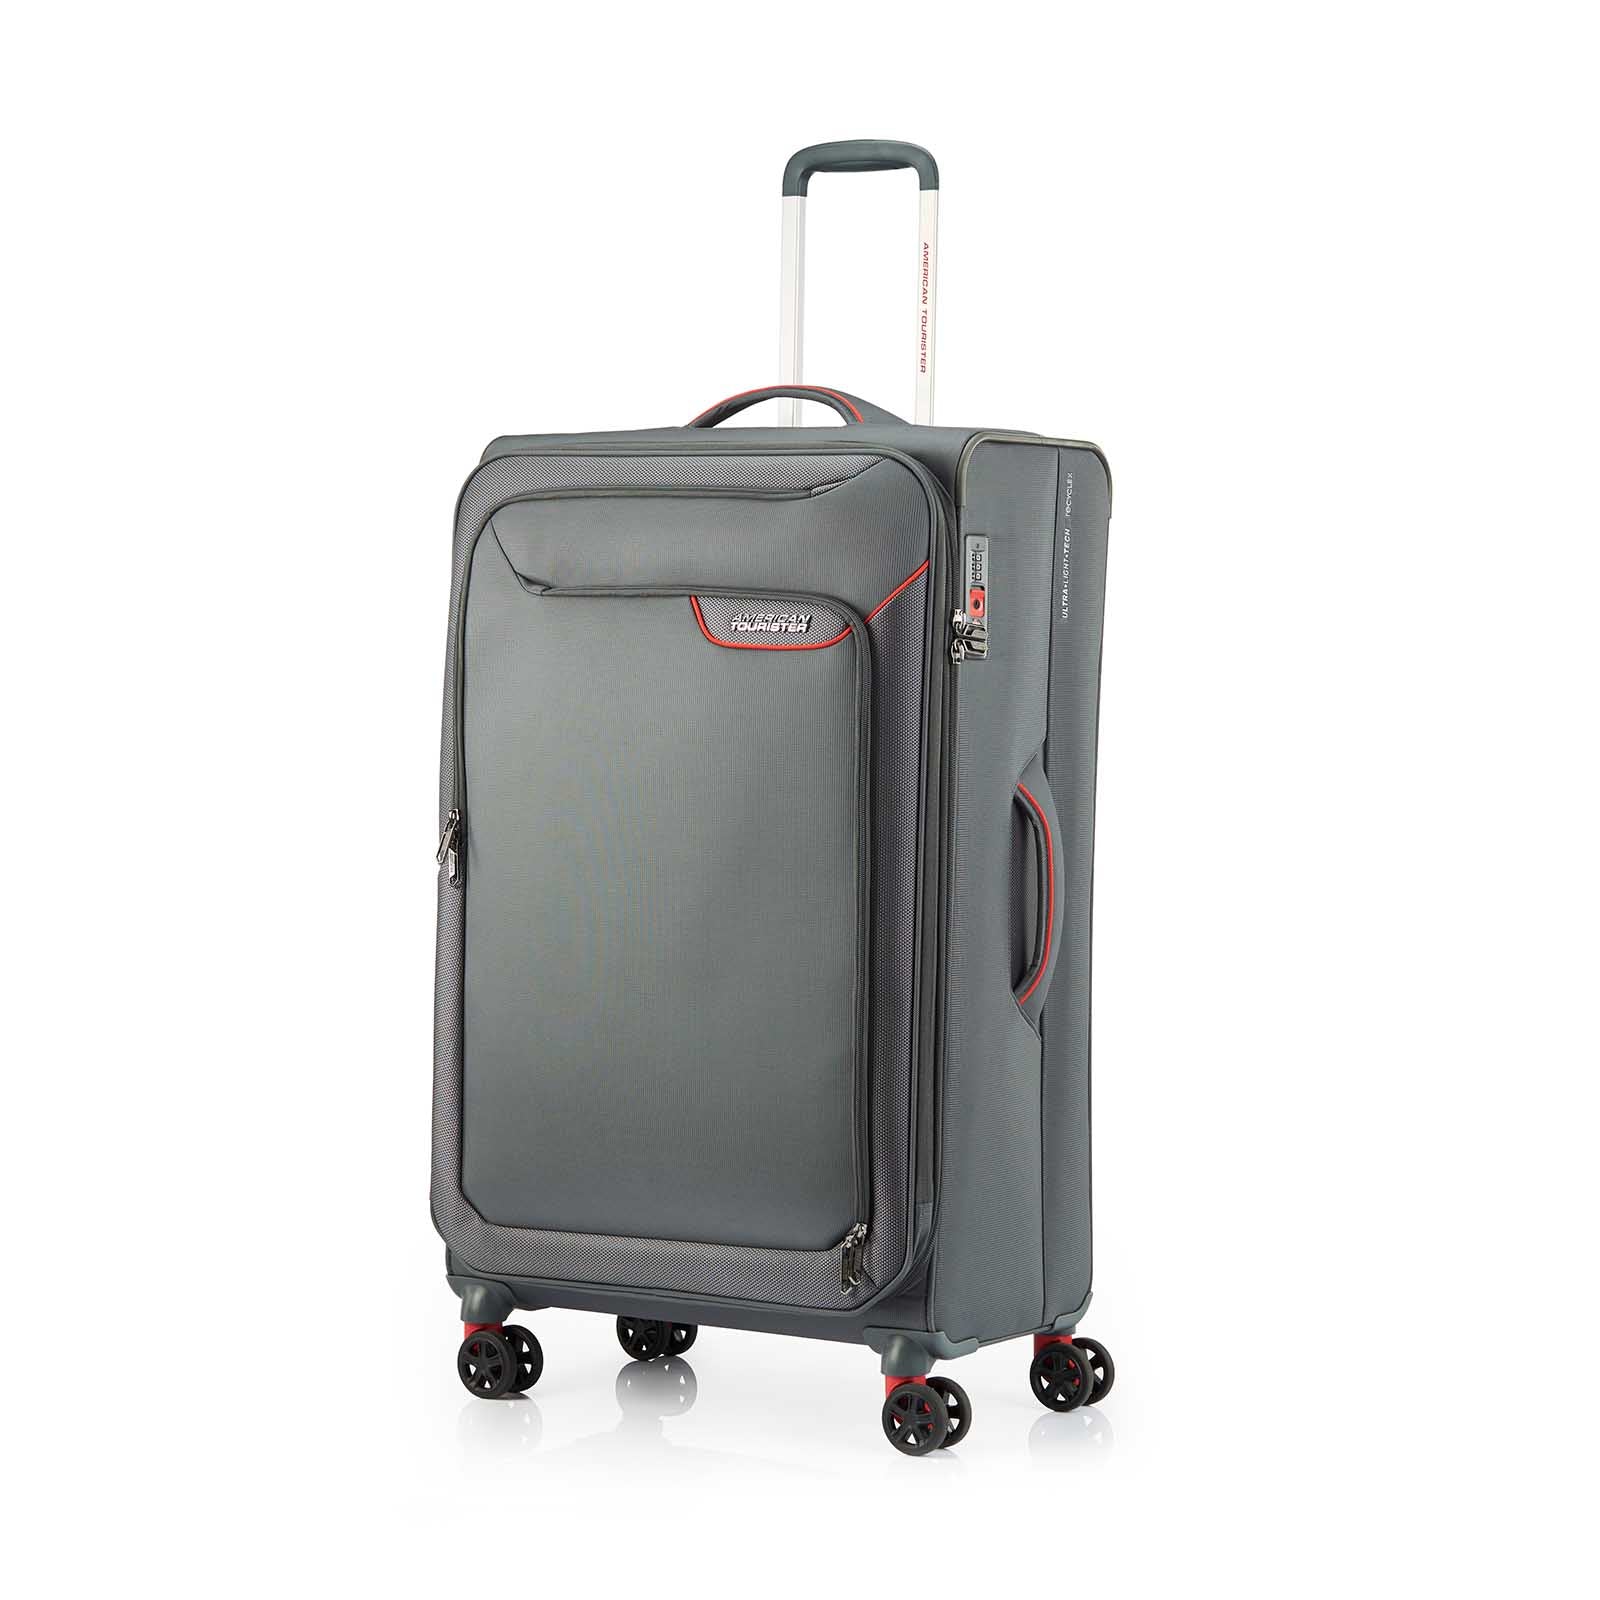 American-Tourister-Applite-4-Eco-82cm-Suitcase-Grey-Red-Front-Angle